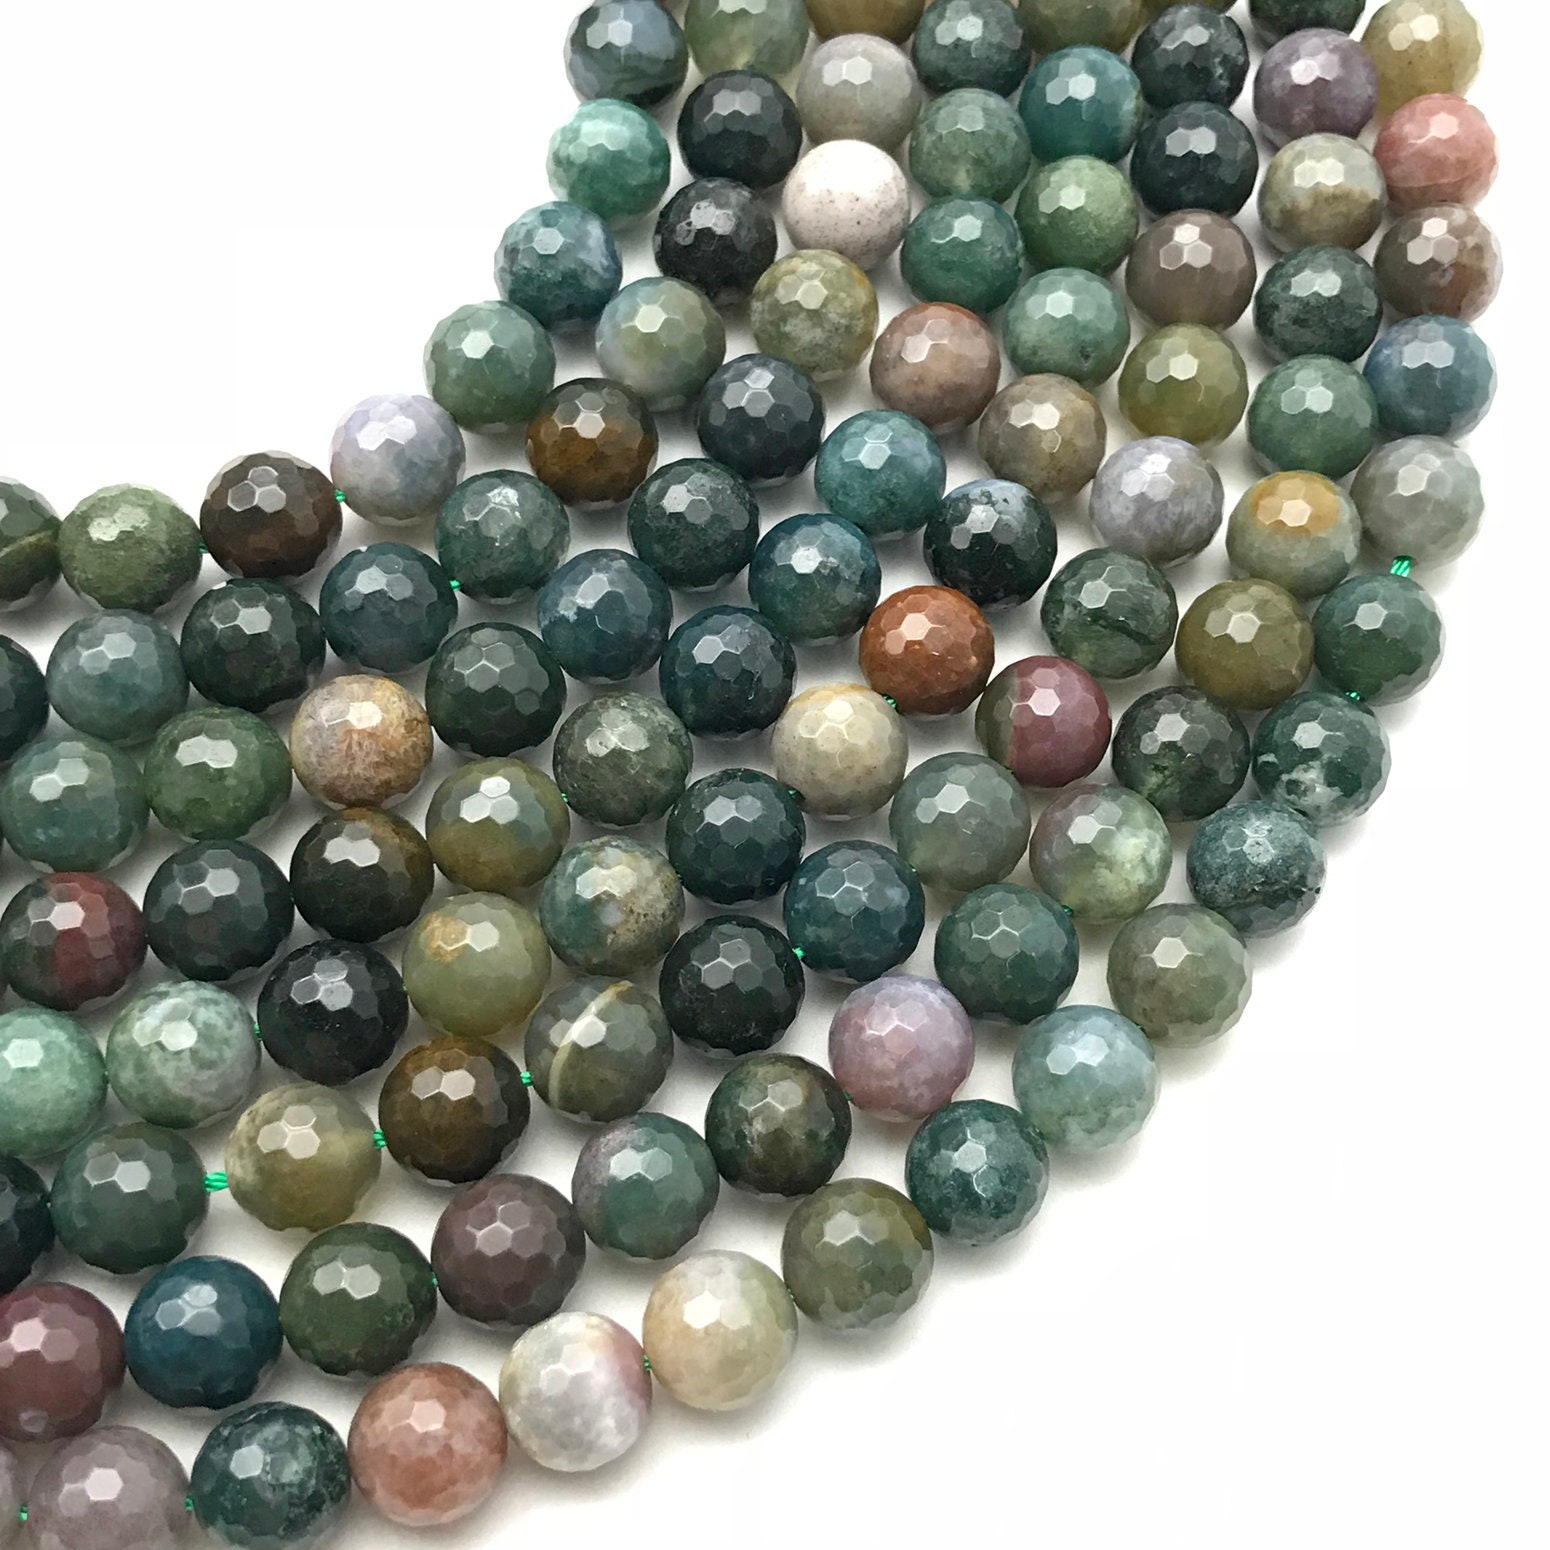 10mm Faceted Indian Agate Beads Gemstone Beads Wholesale | Etsy